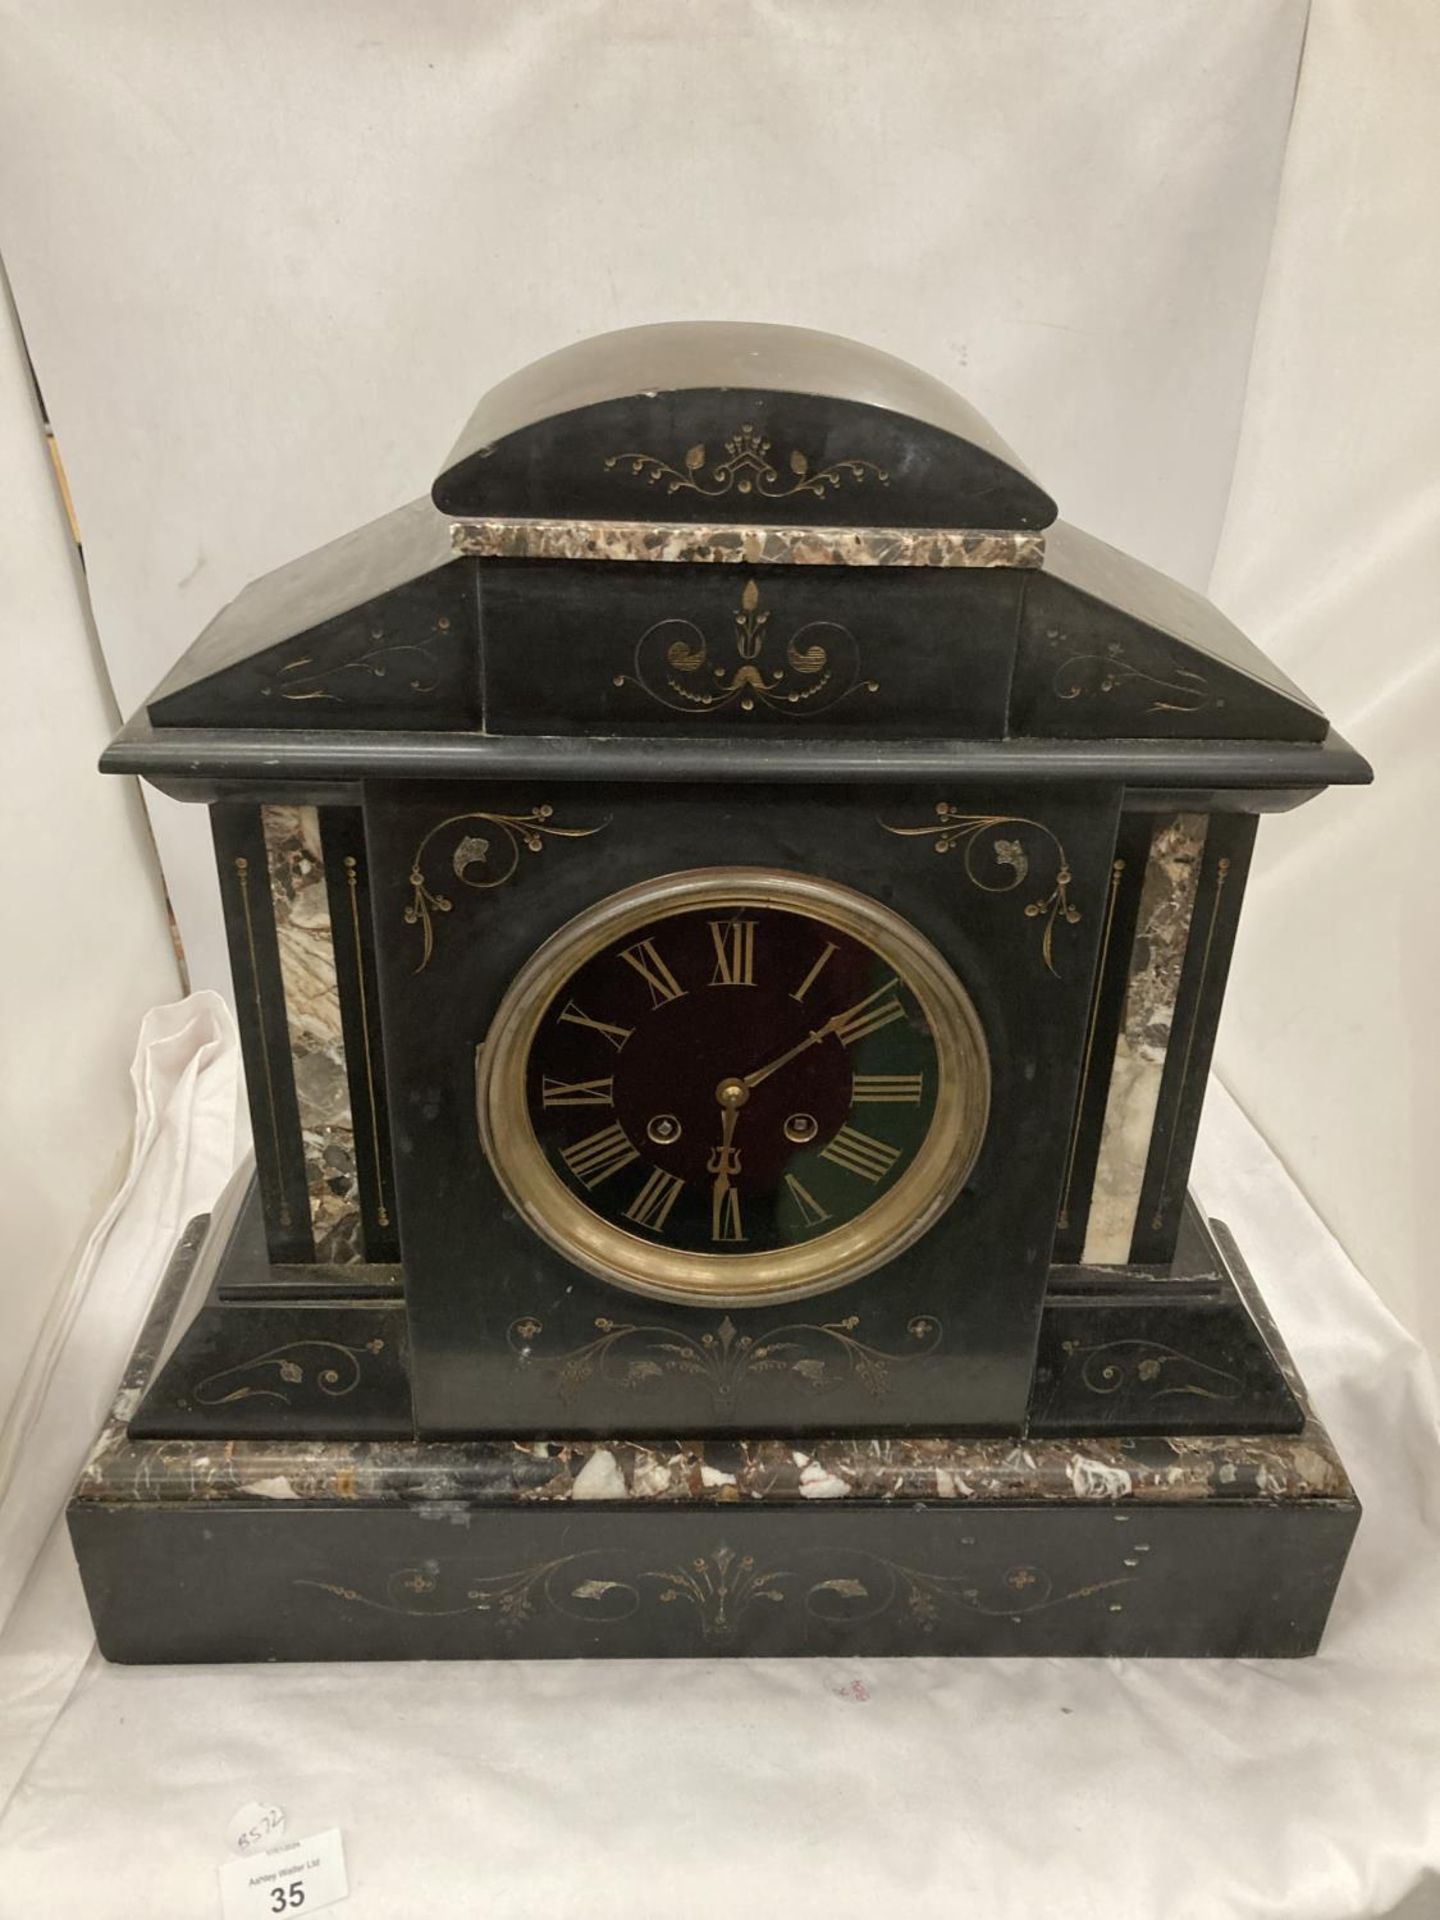 A LARGE DECORATIVE MARBLE AND SLATE MANTLE CLOCK